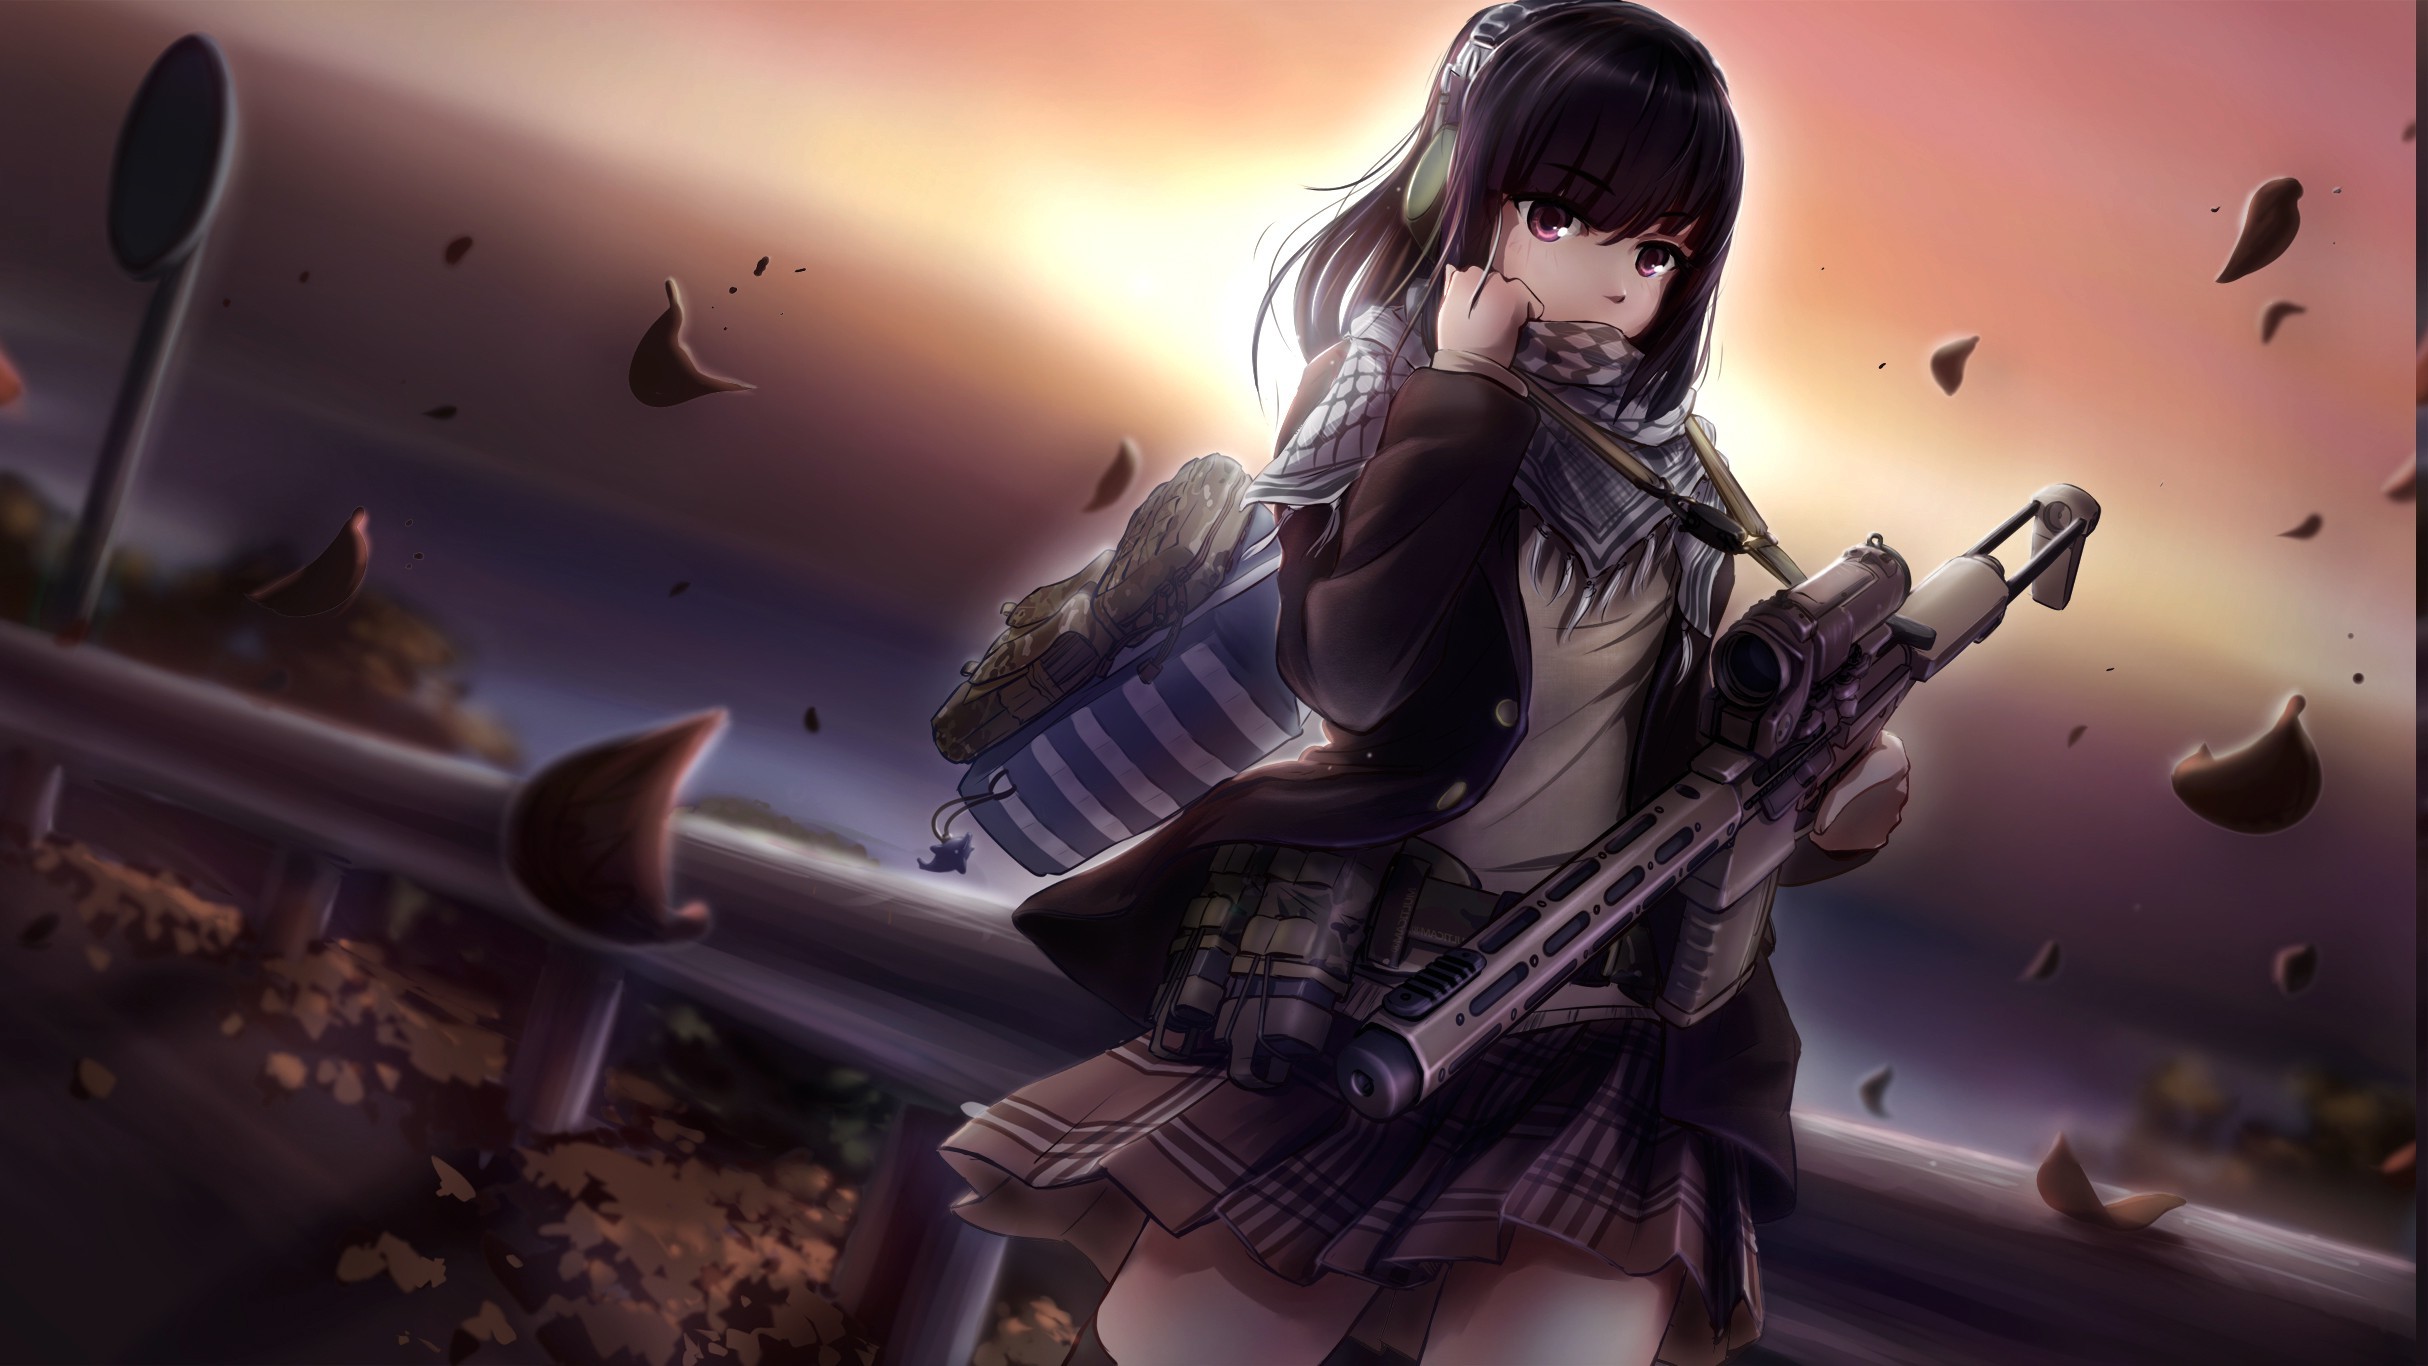 2428x1366 Girl with a sniper rifle Wallpaper #2344 | Character Design .